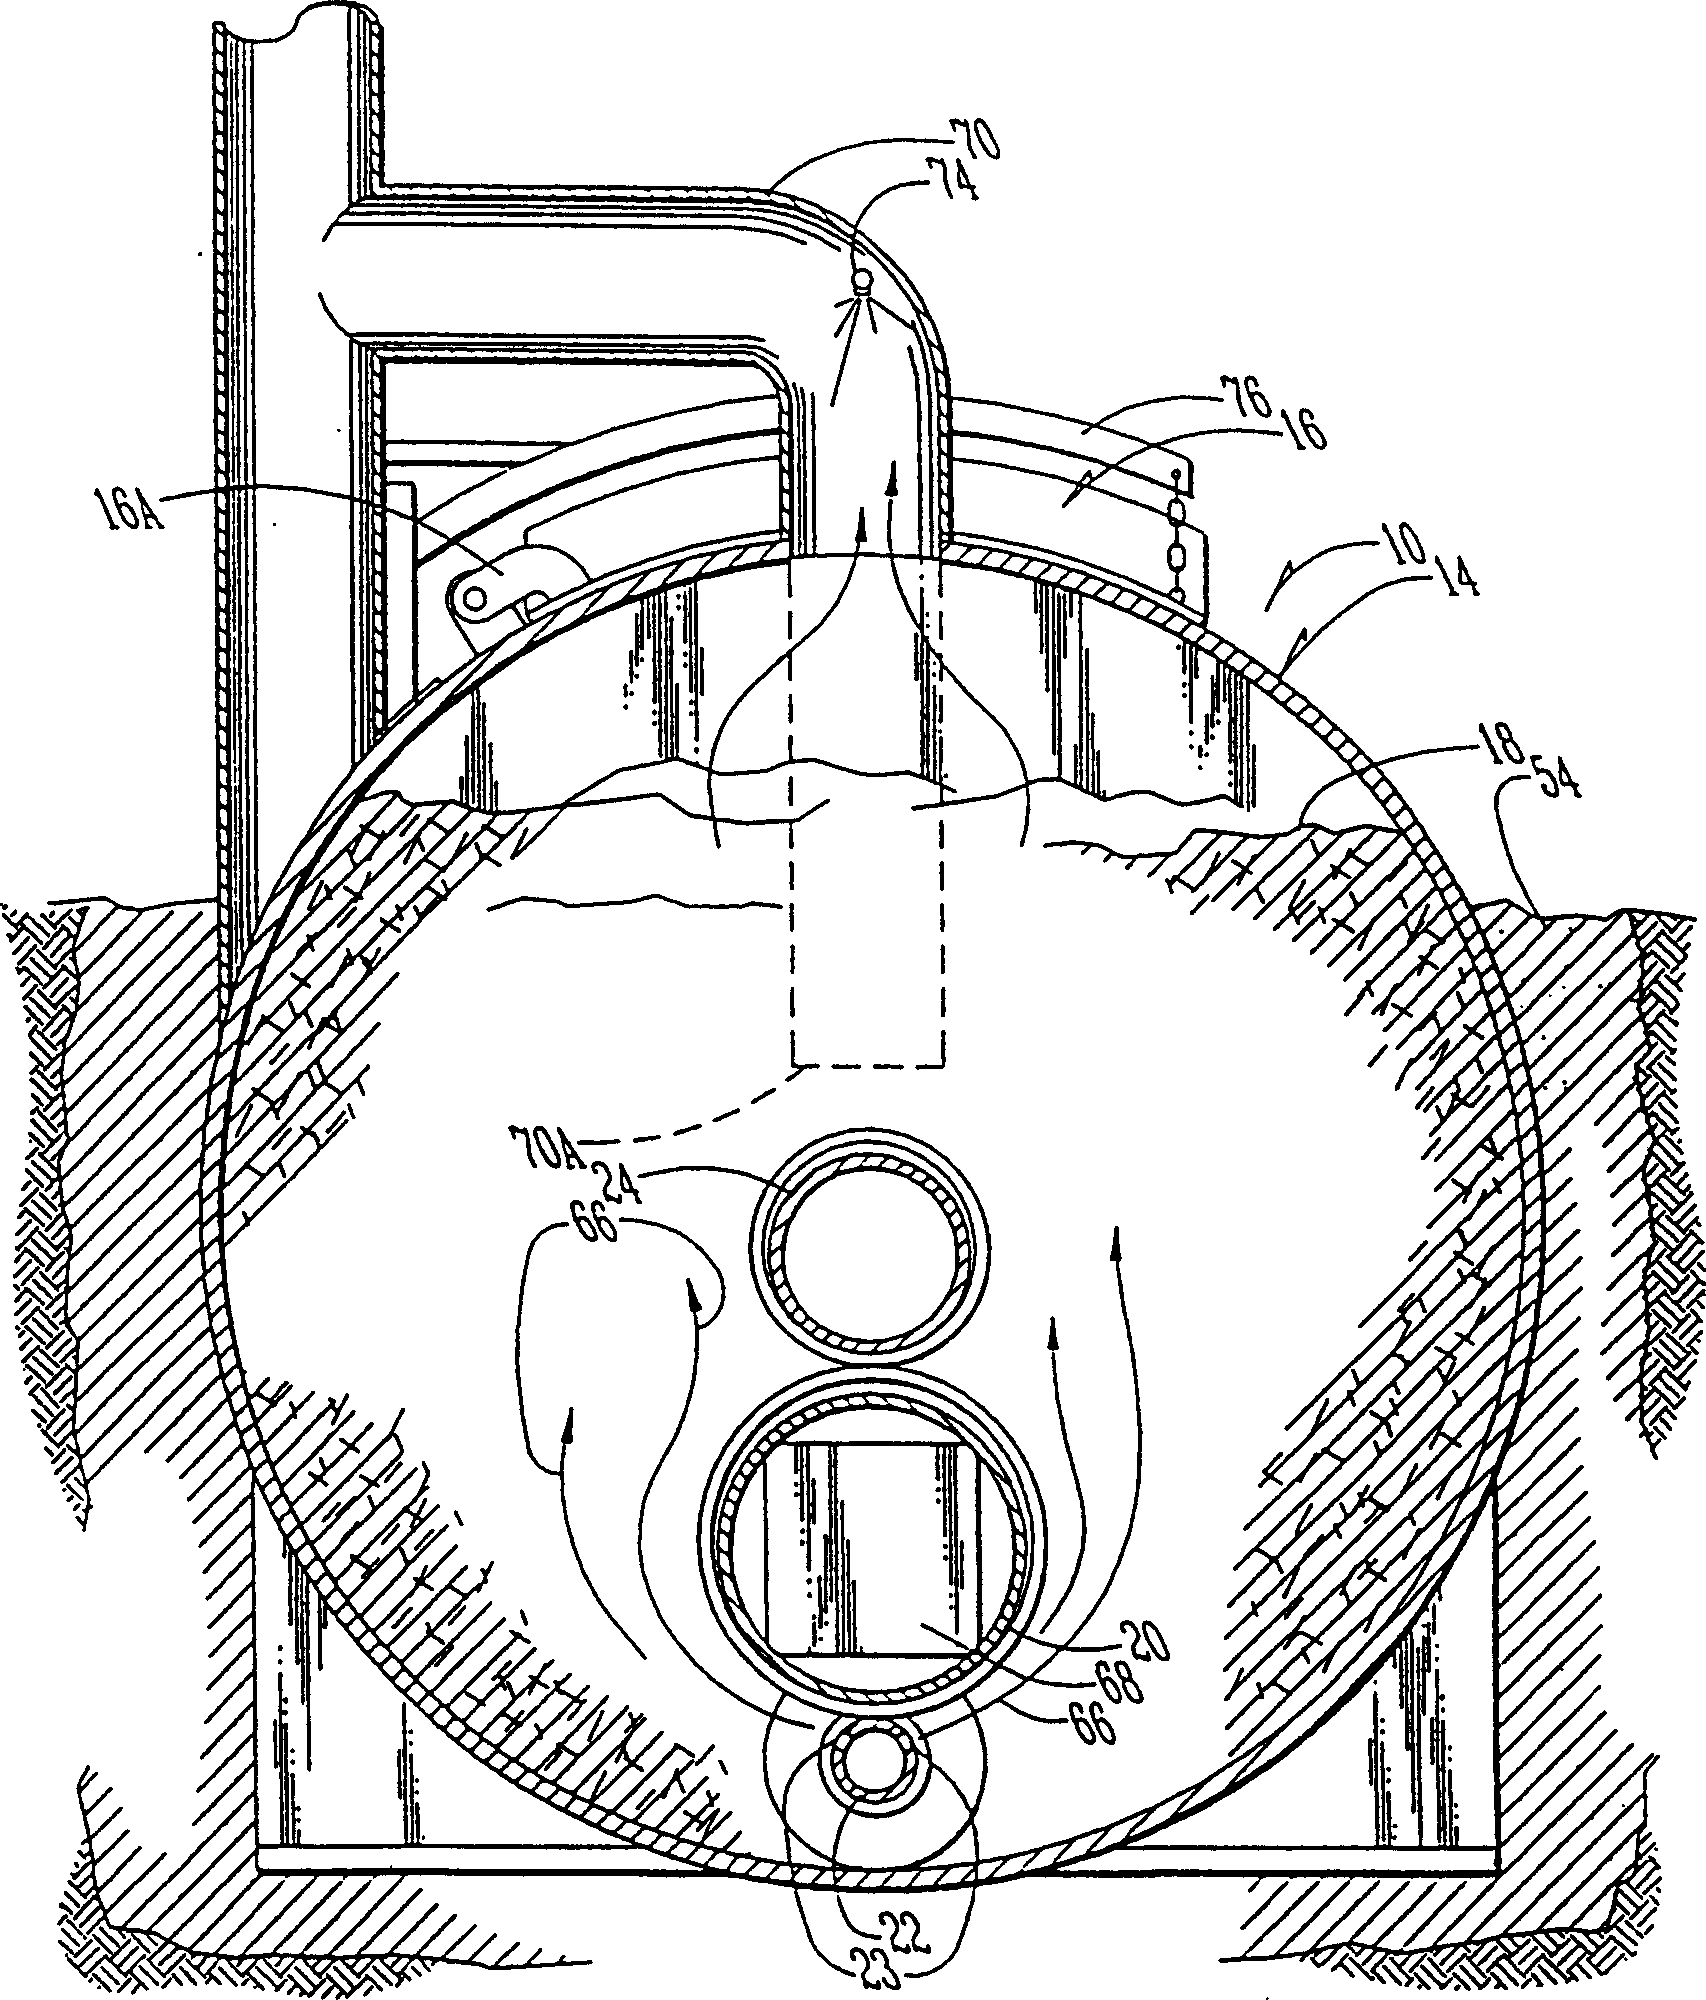 Apparatus and method for burning organic material